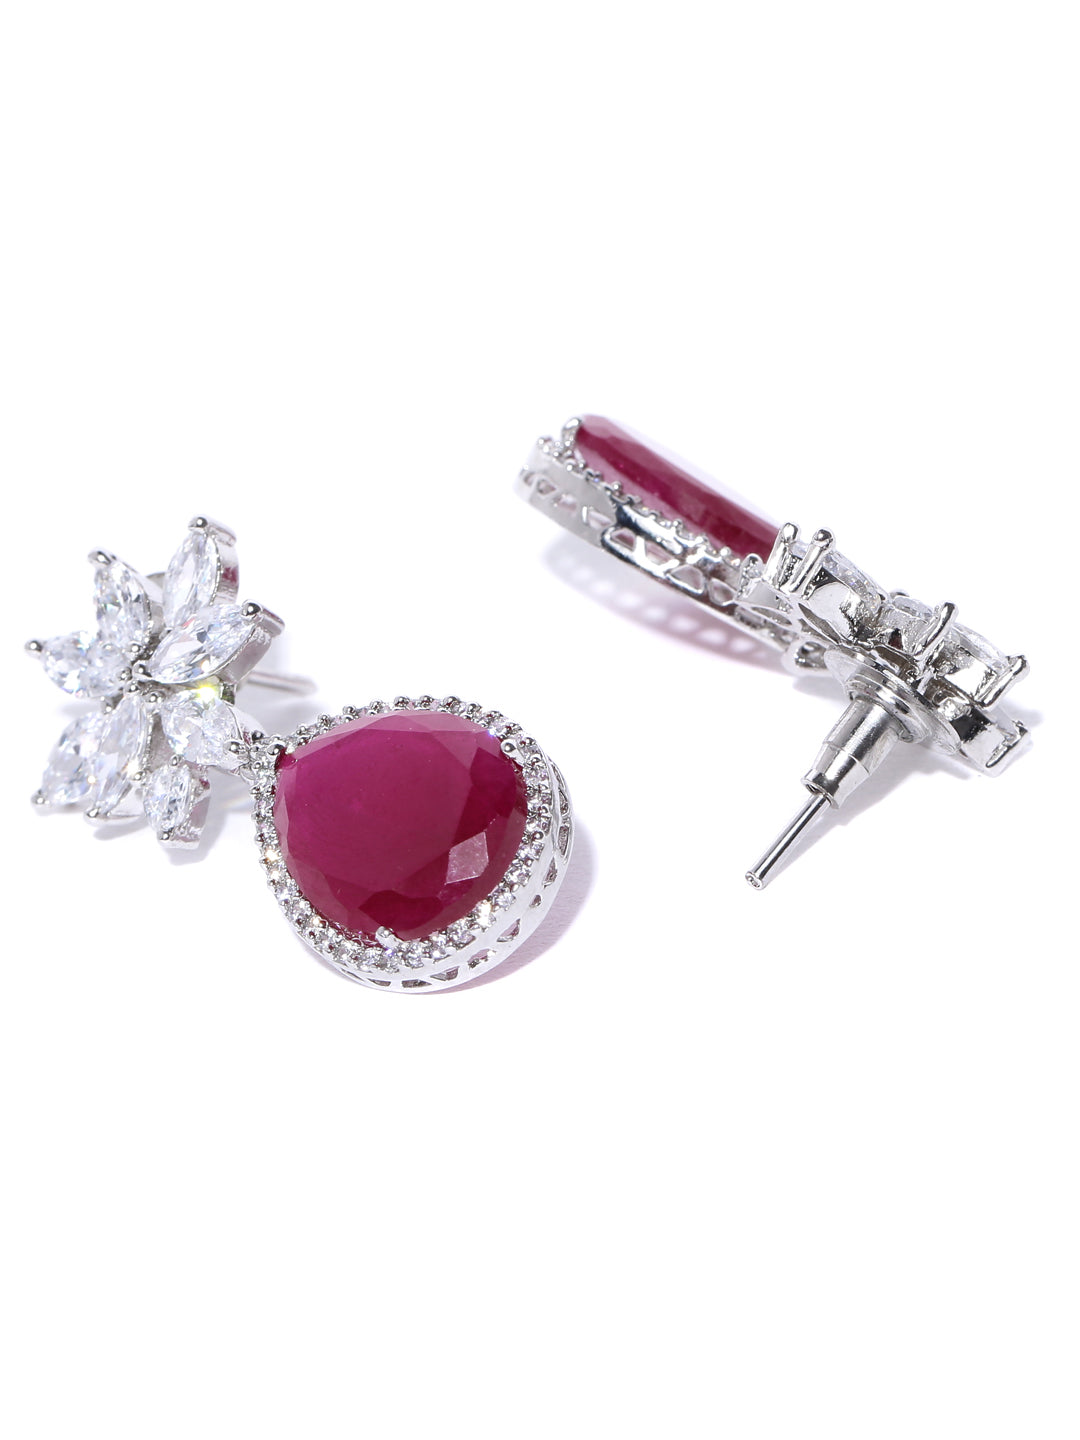 Silver-Plated American Diamond and Ruby Studded Floral Patterned Drop Earrings in Magenta and White Color